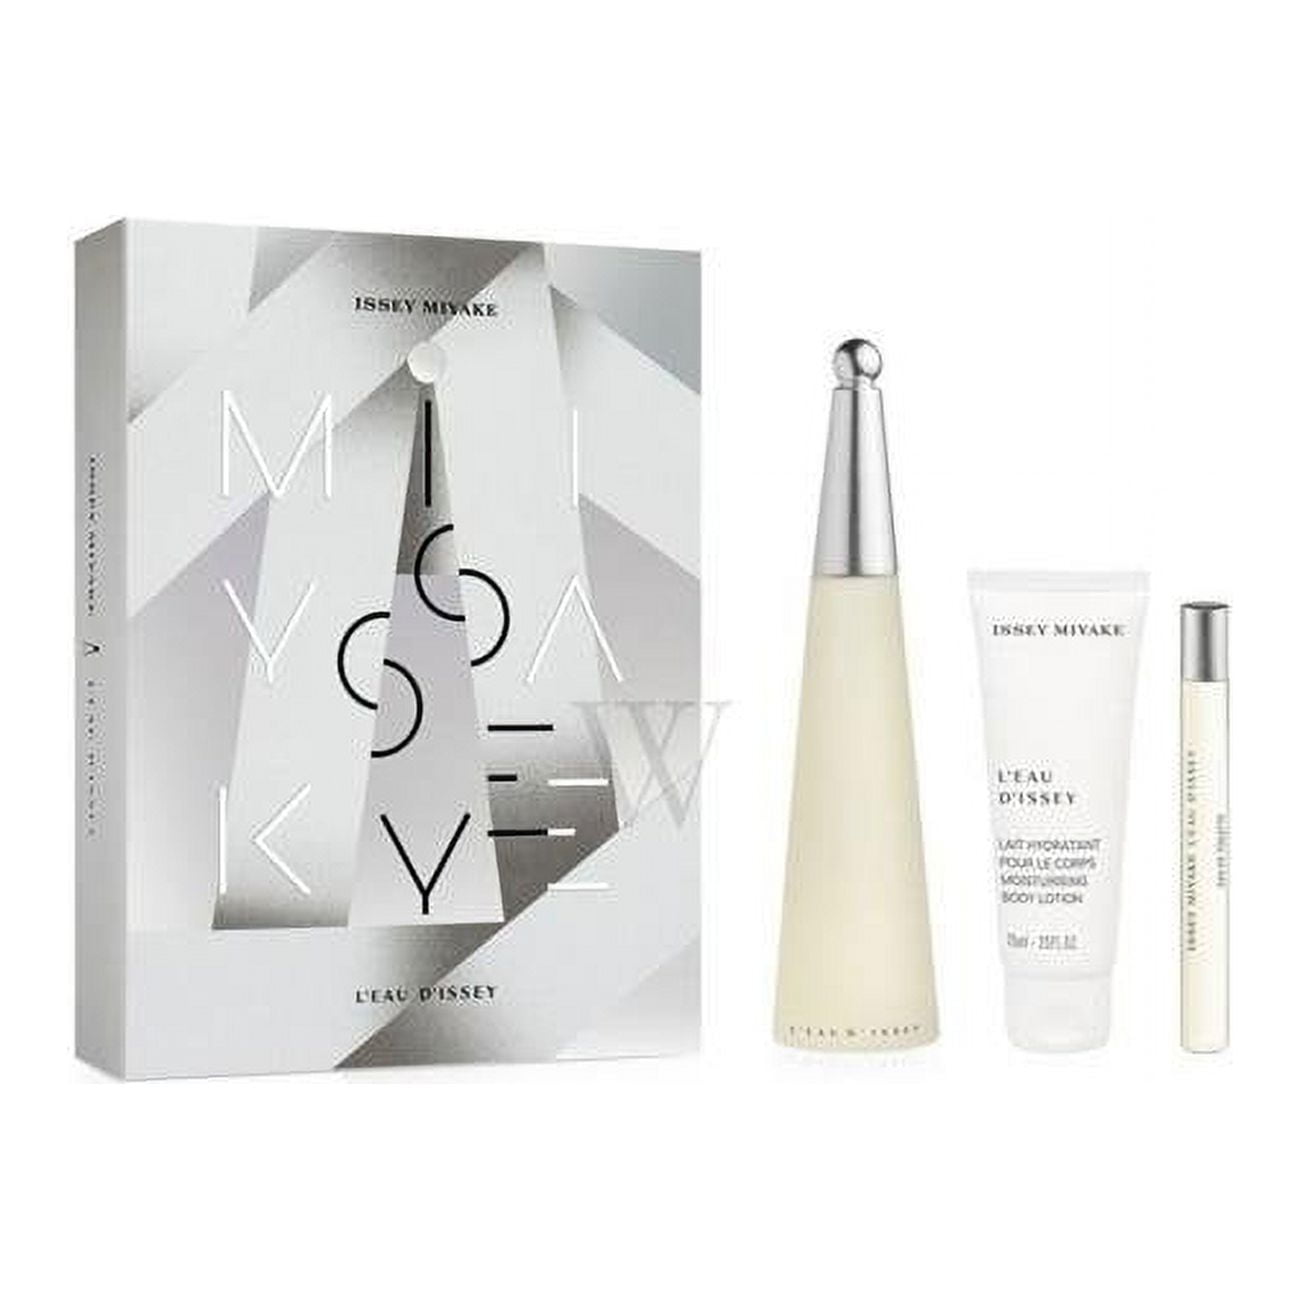 Issey Miyake L'EAU D'ISSEY Perfume Gift Set for Women, 3 Pieces ...